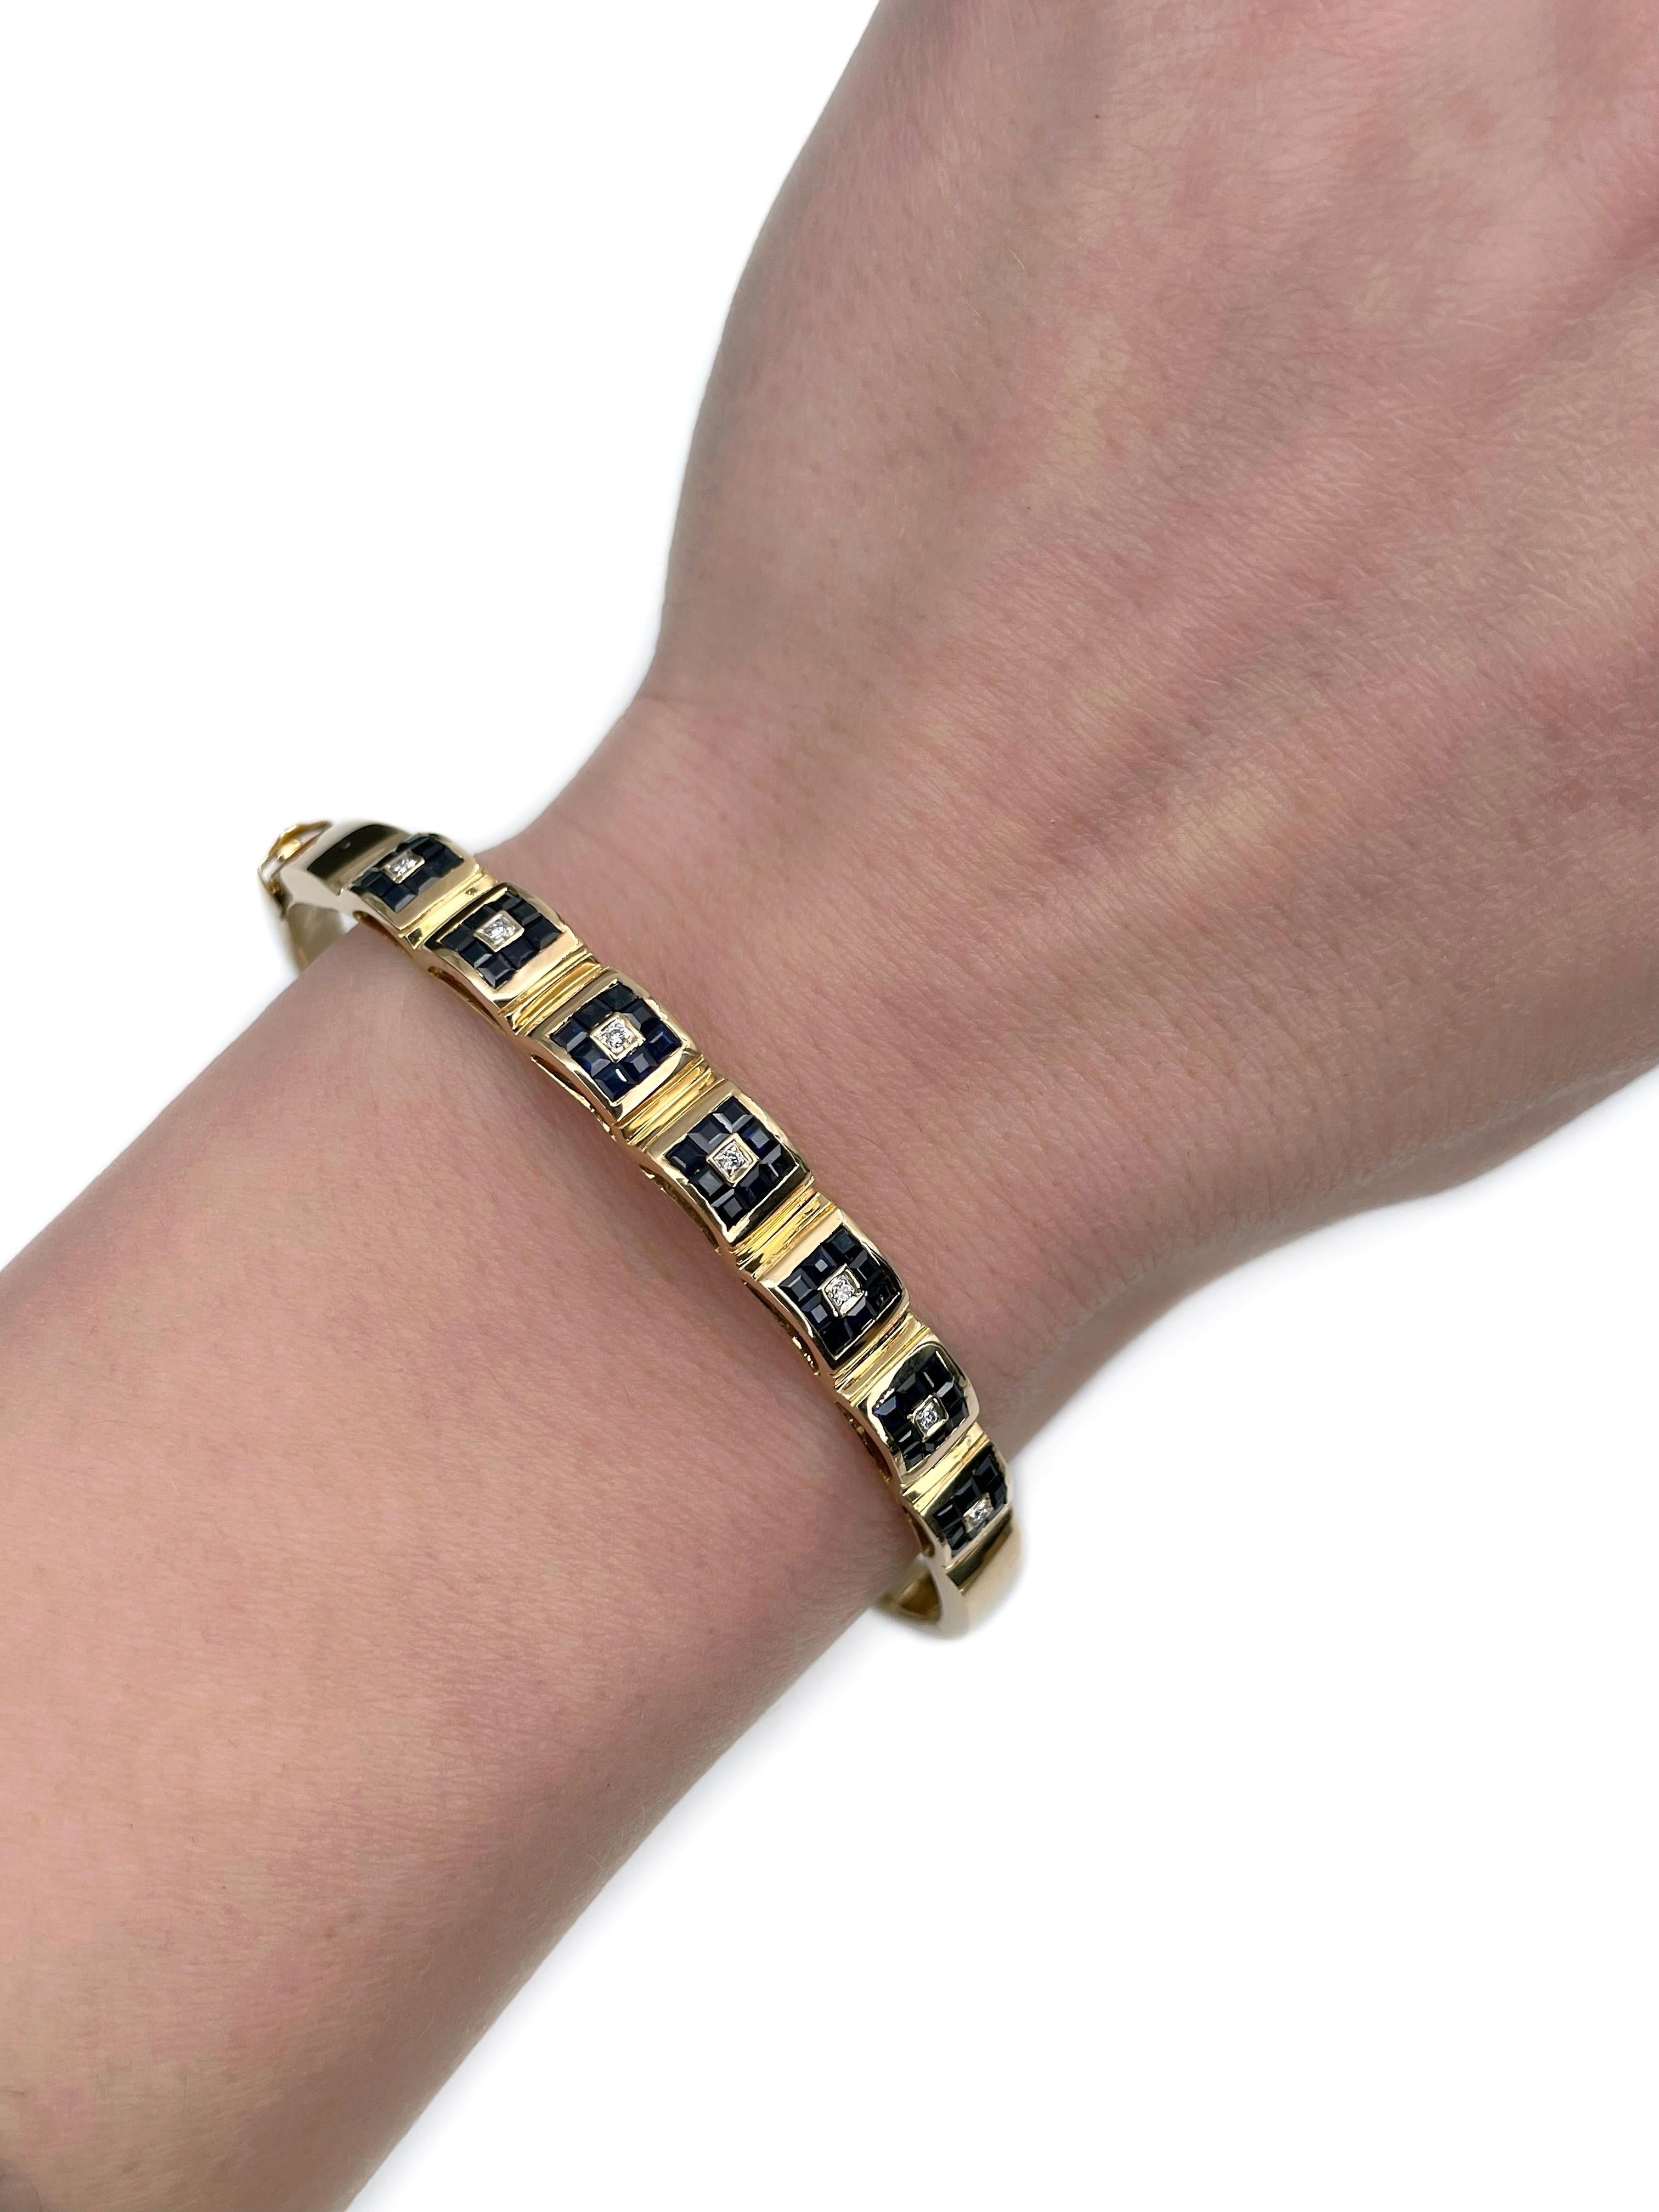 This is a Mid Century hinged bangle bracelet crafted in 18K yellow gold. Circa 1970. 

The piece features:
- 56 sapphires, square step cut, TW 1.40ct, B 7/4-7/5, VS-SI
- 7 diamonds, brilliant cut, TW 0.035ct, RW-W, VS-SI

Weight: 23.14g
Inner